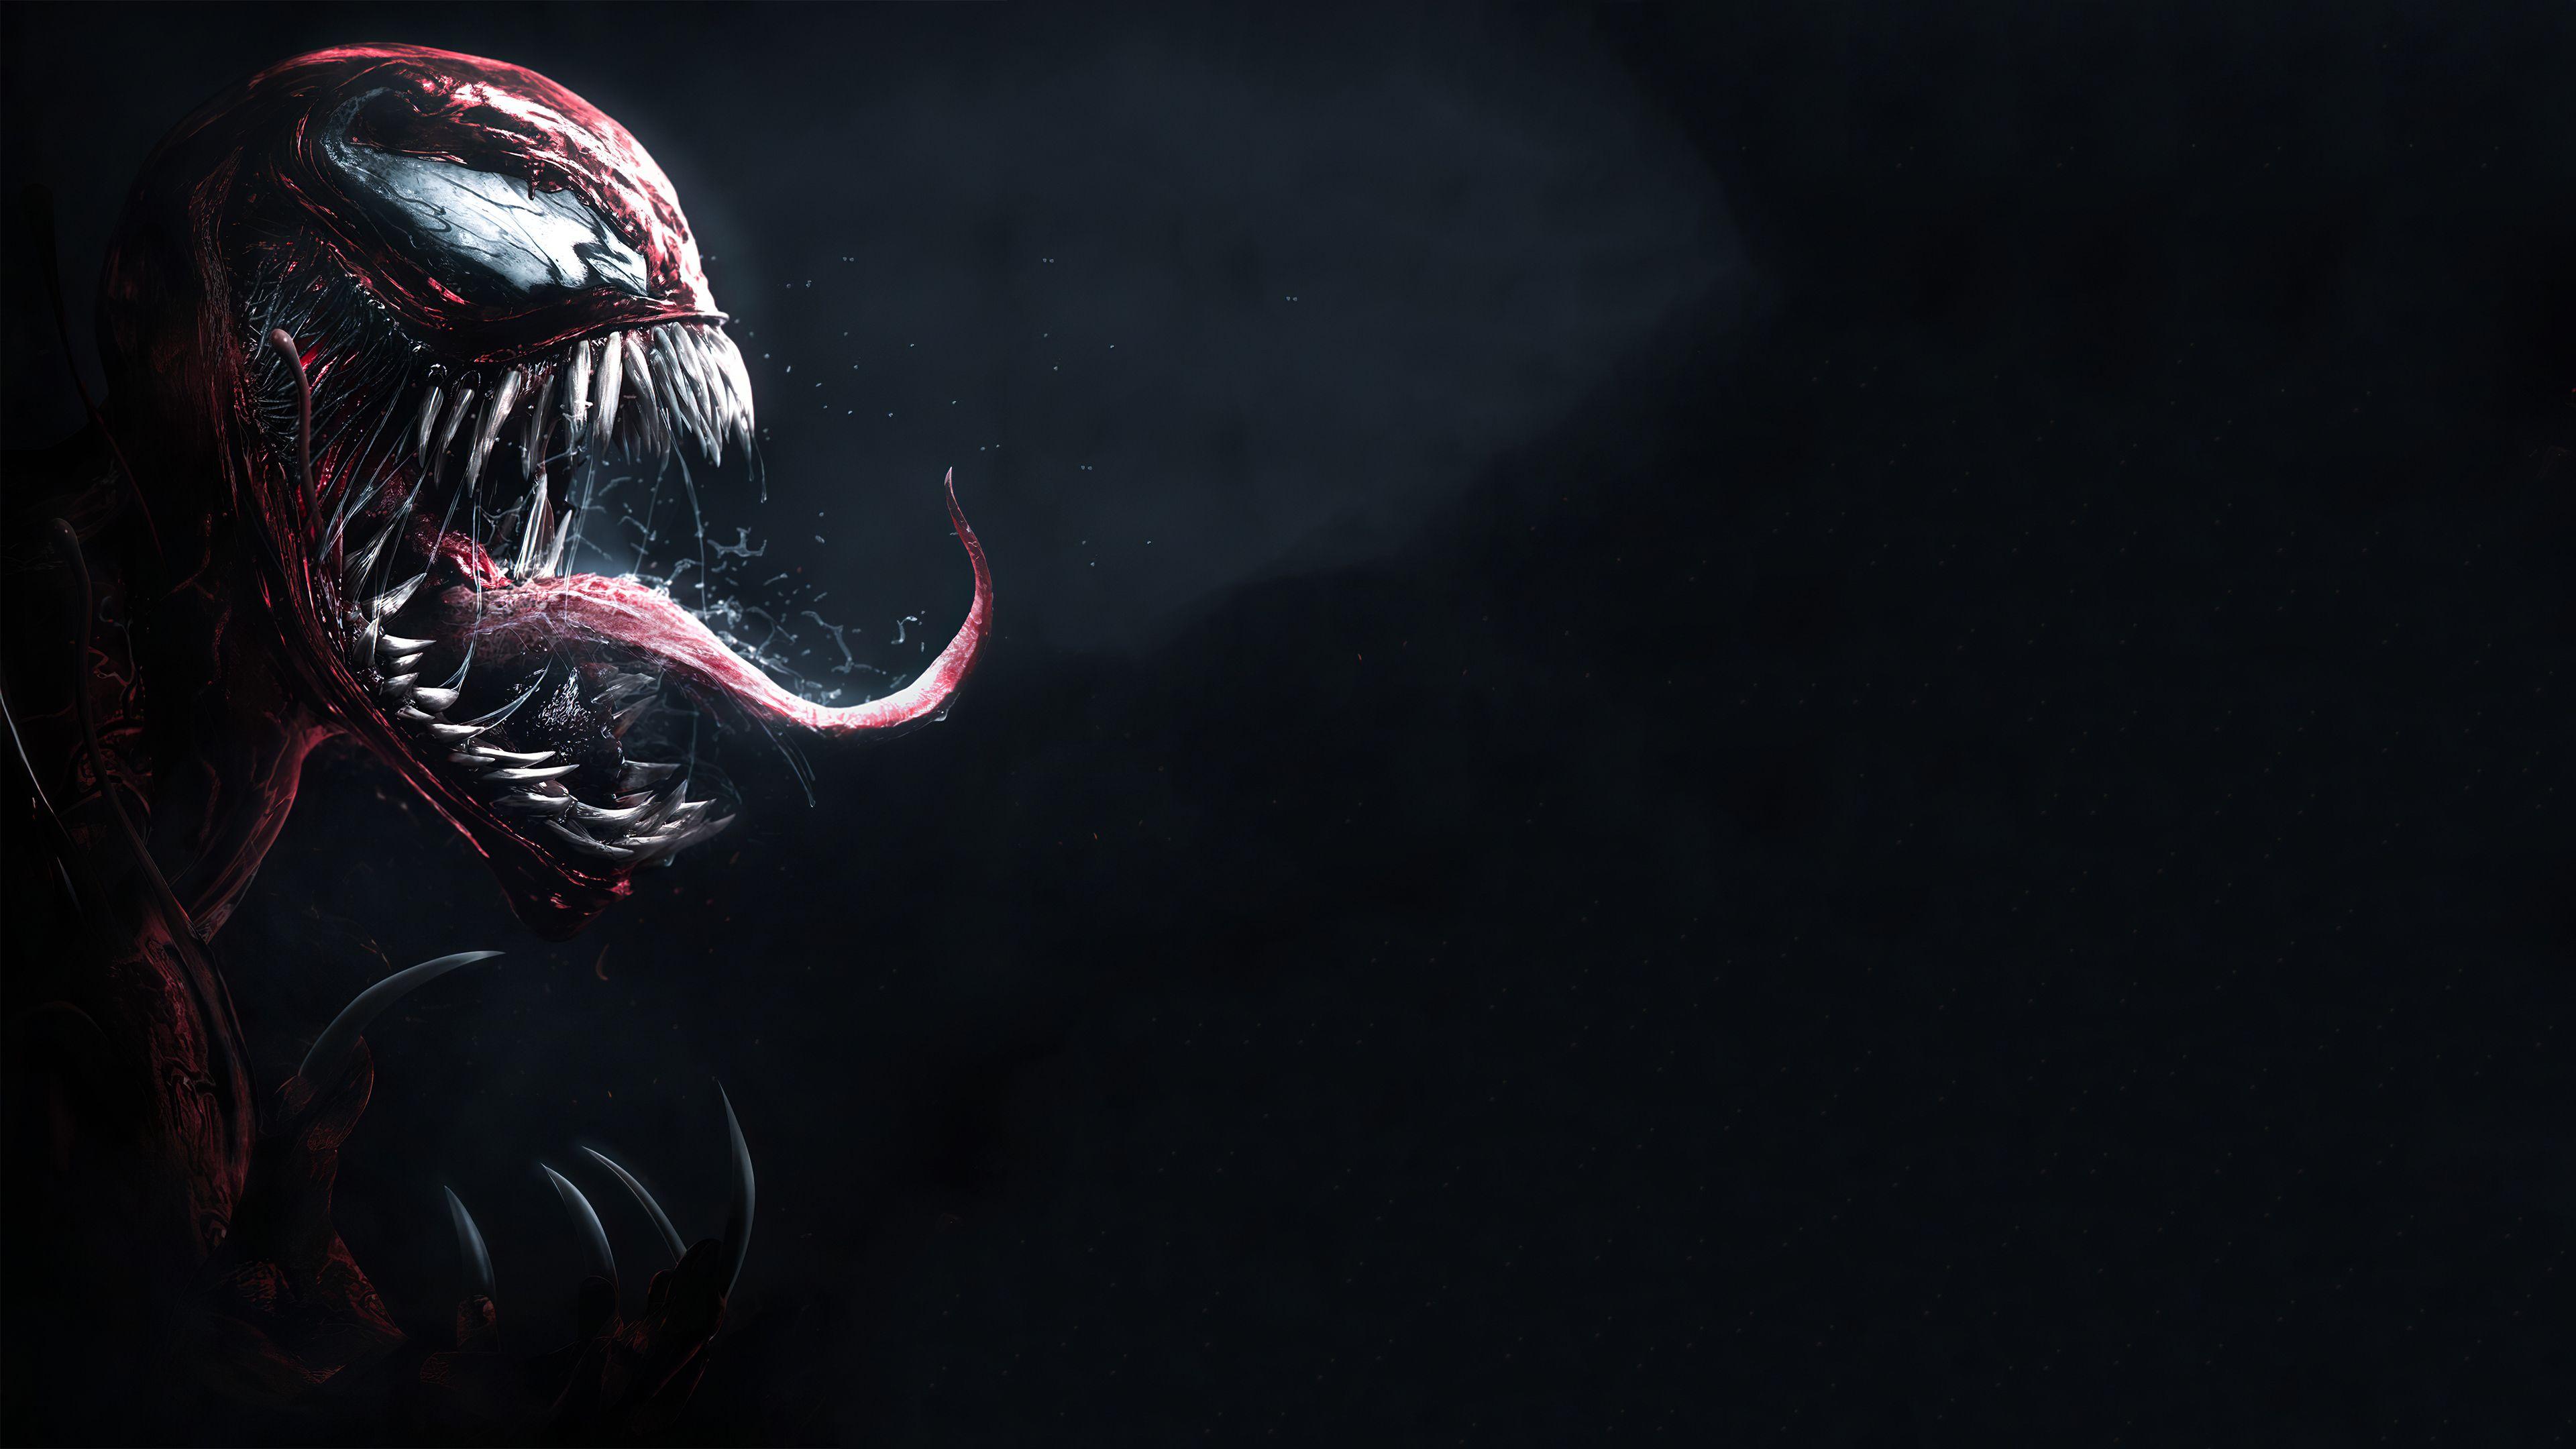 Venom Let There Be Carnage Wallpapers  Top 35 Best Venom 2 Backgrounds